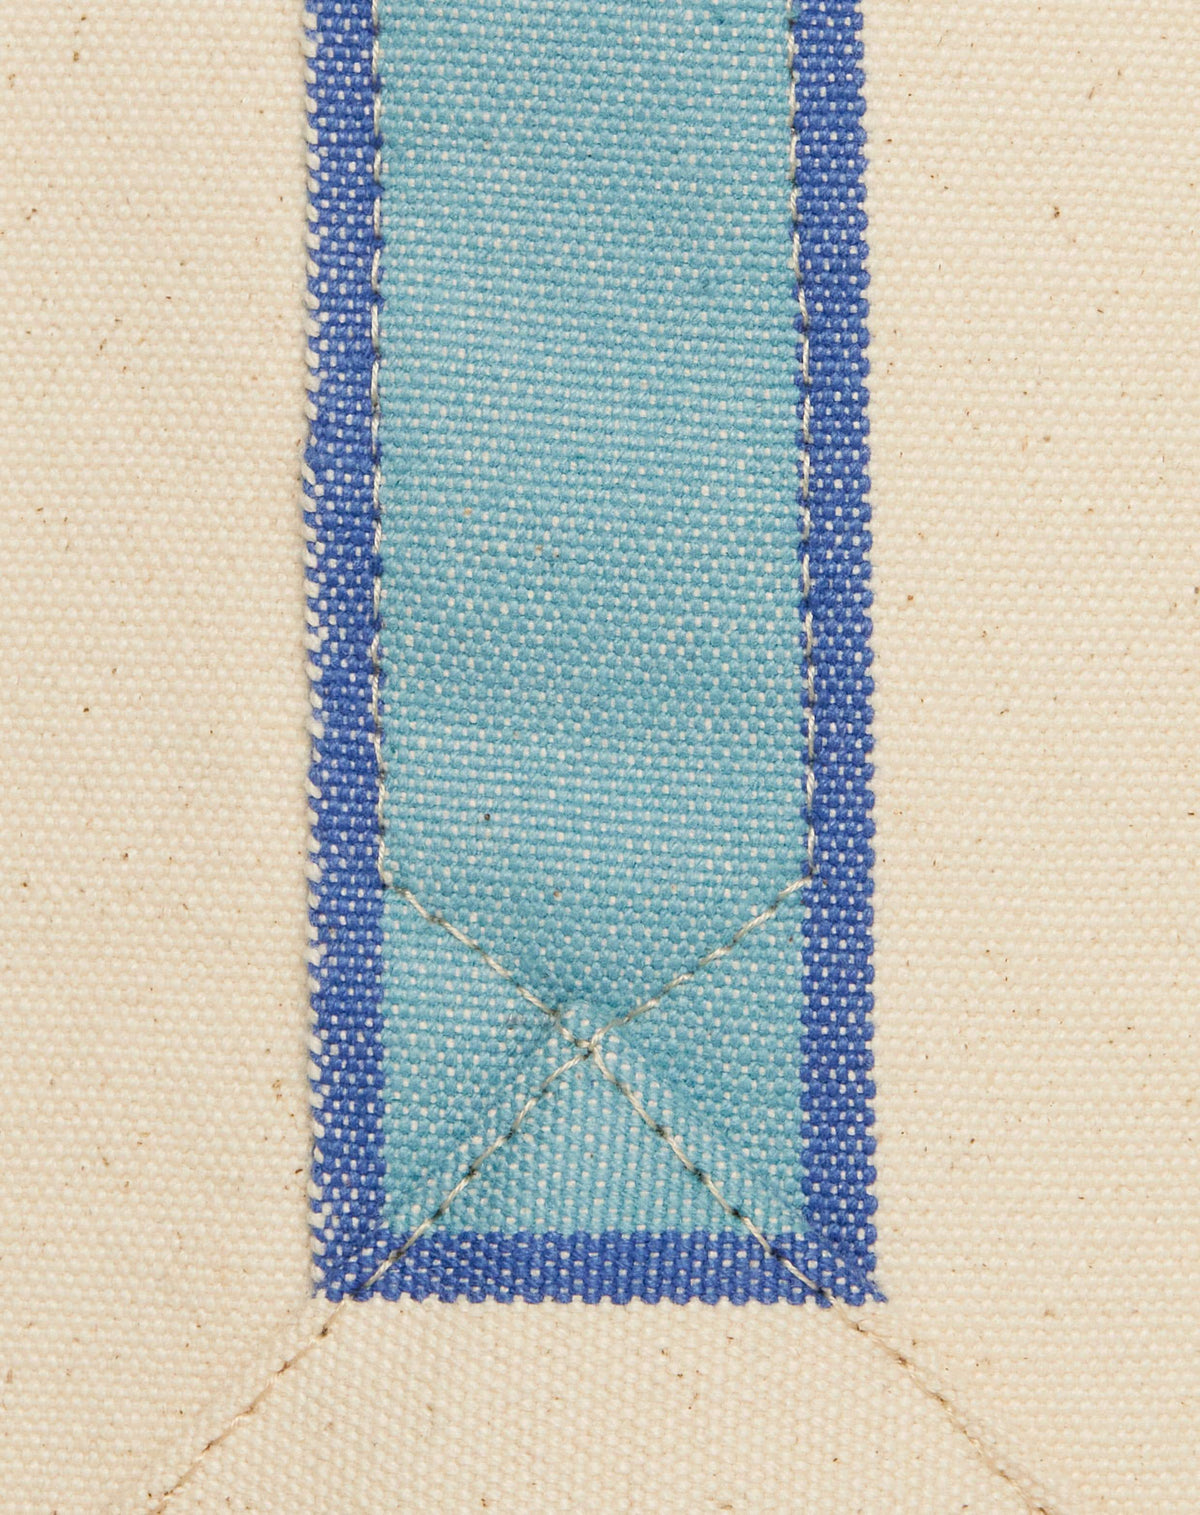 Close-up image of natural canvas with contrasting stripe and stitching detail.